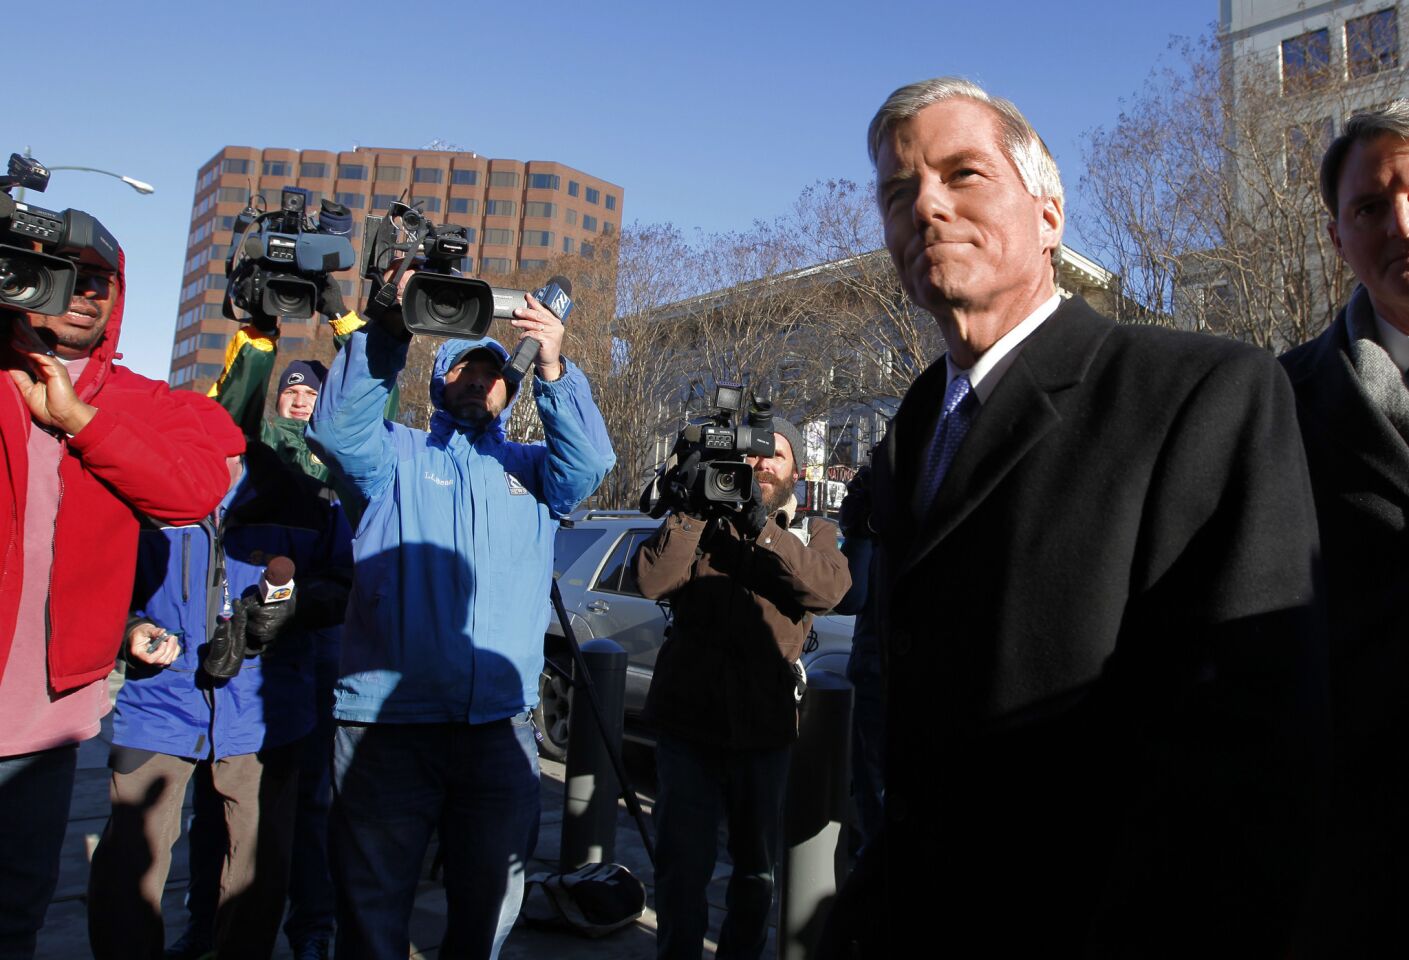 Bob McDonnell indicted